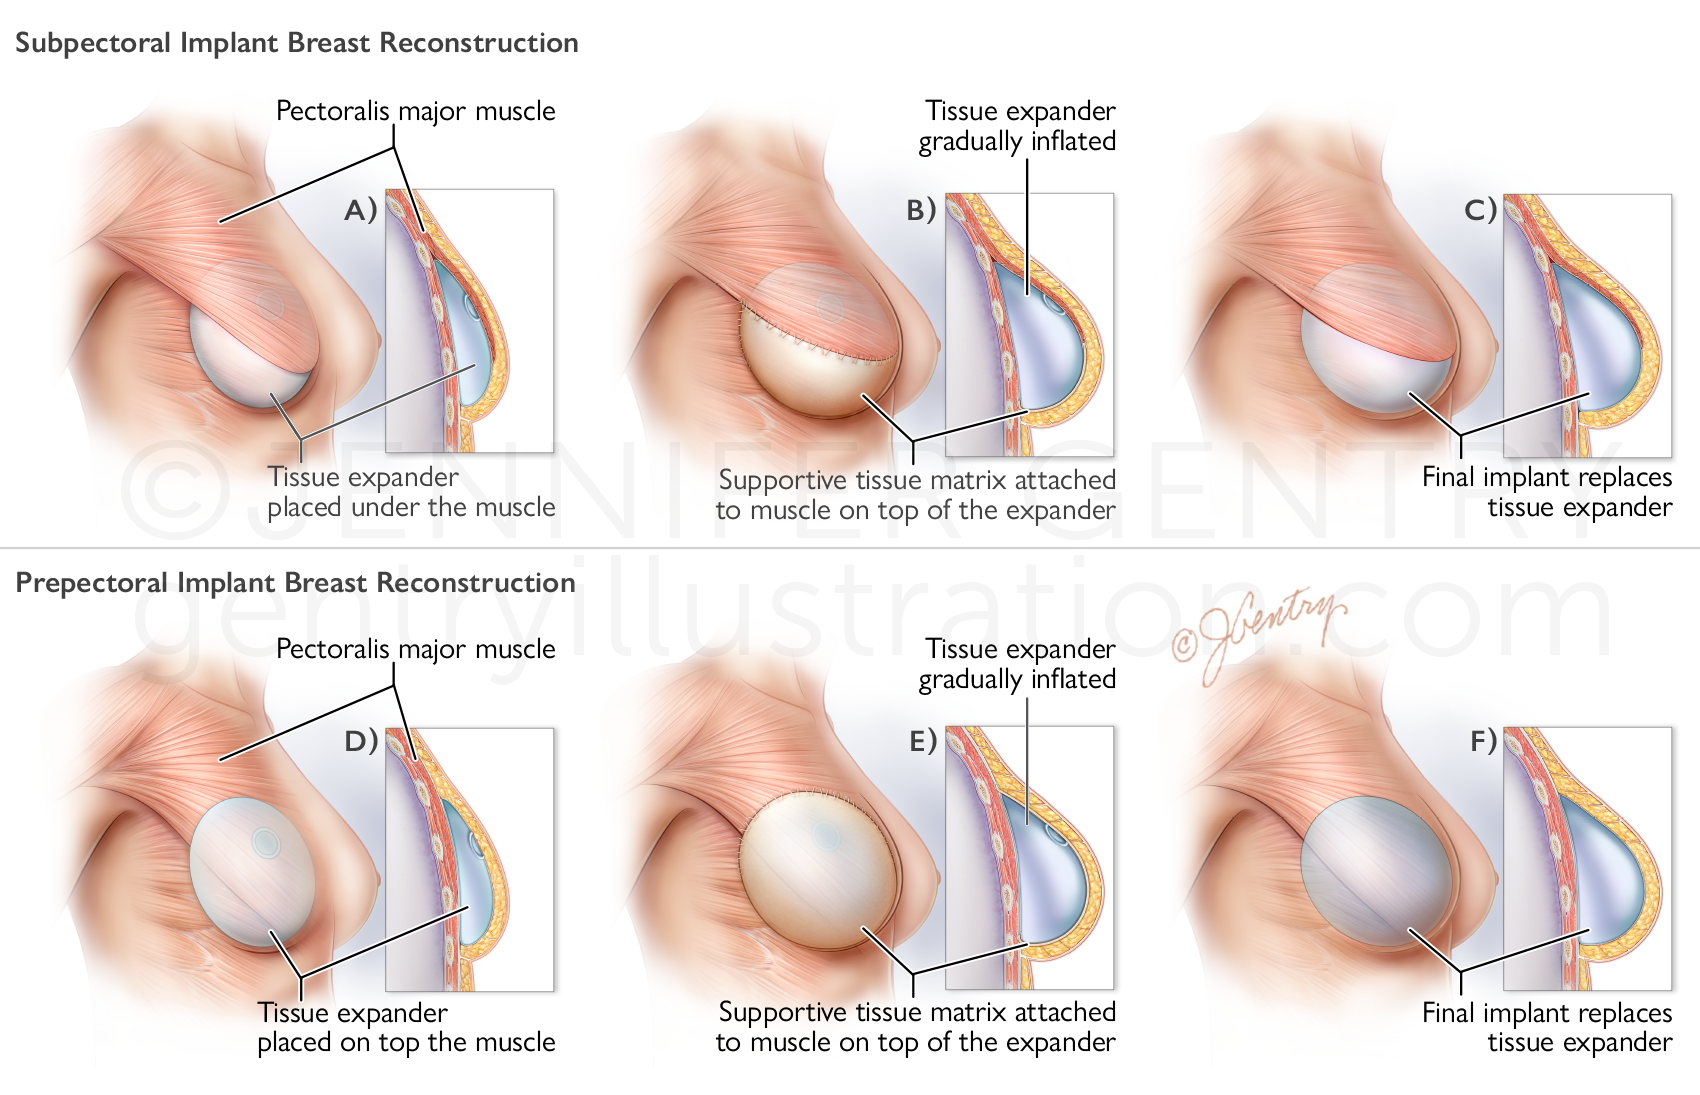 Breast reconstruction tissue expanders